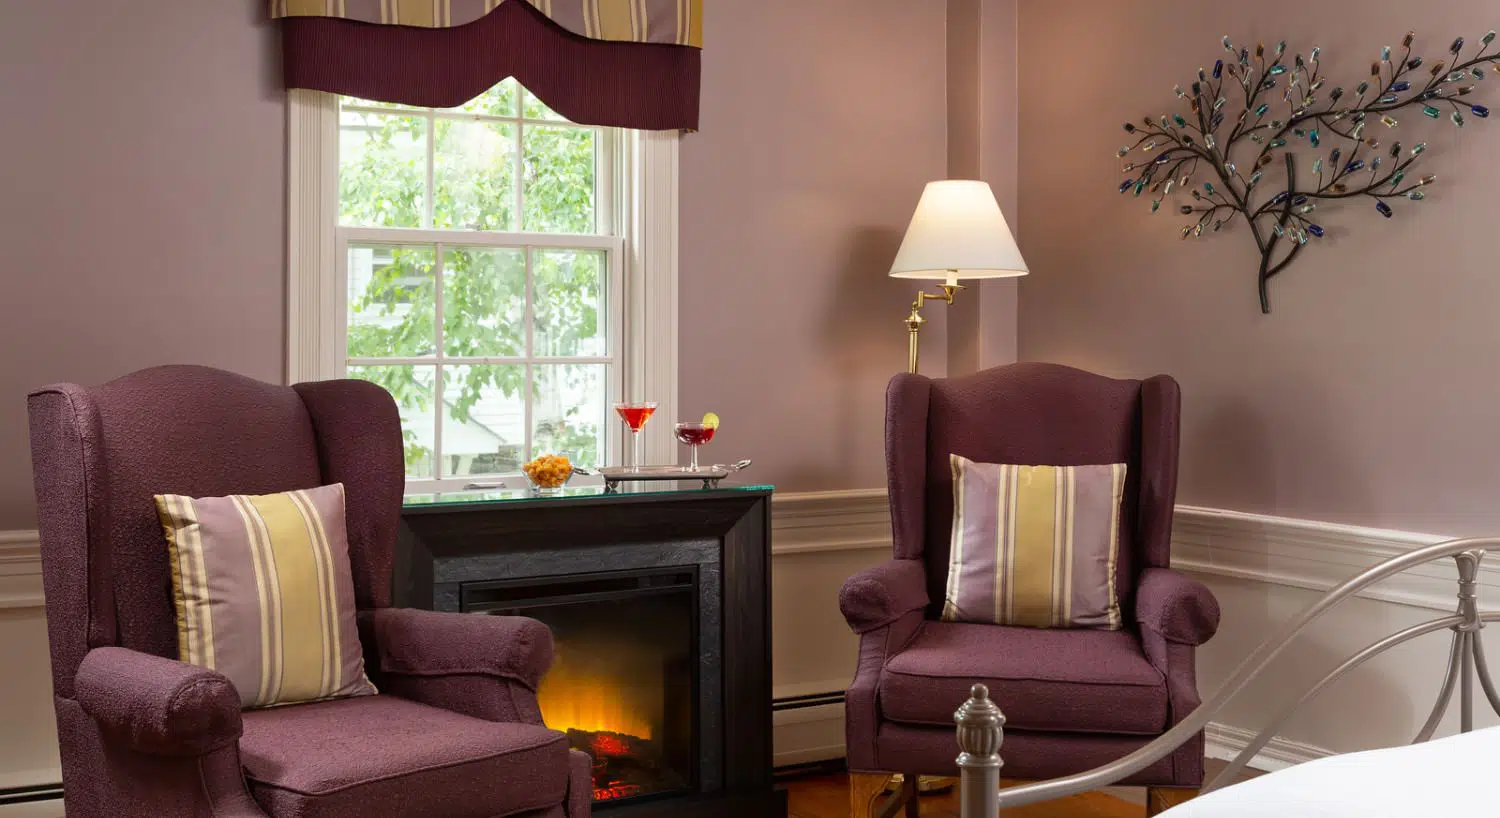 Sitting area in bedroom with light-lavendar walls and white chair rail, purple upholstered arm chairs, and fireplace